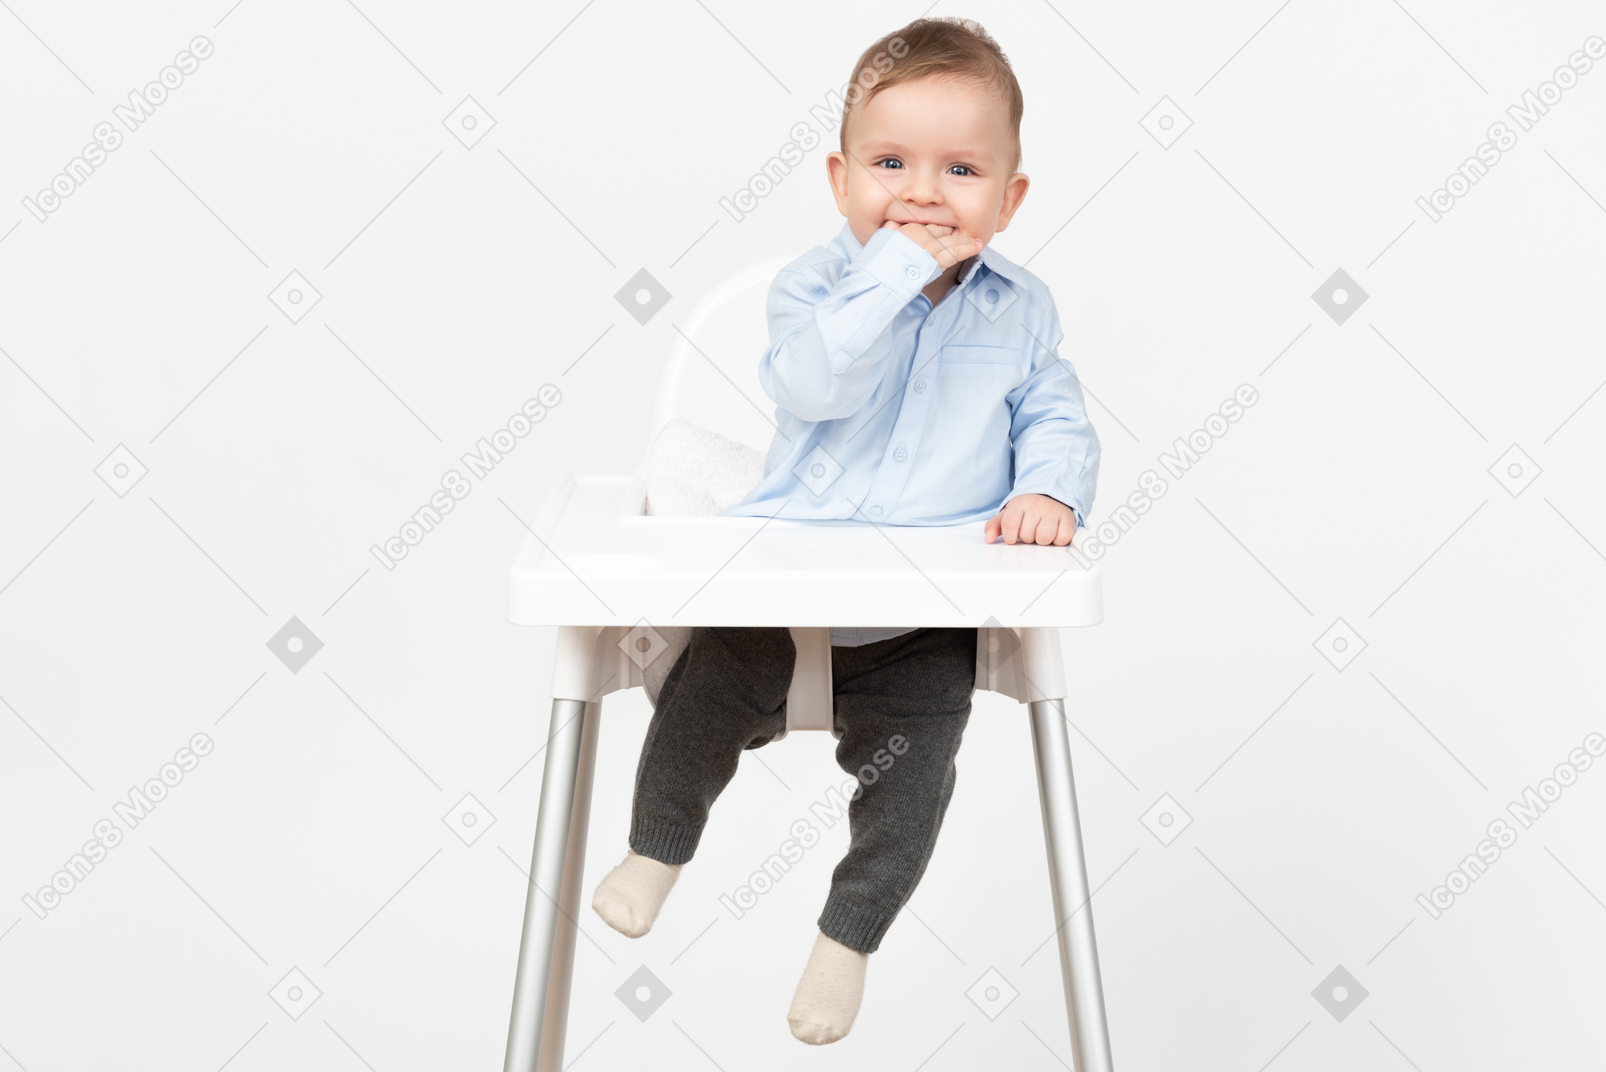 Adorable baby boy sitting in highchair and holding hand in mouth